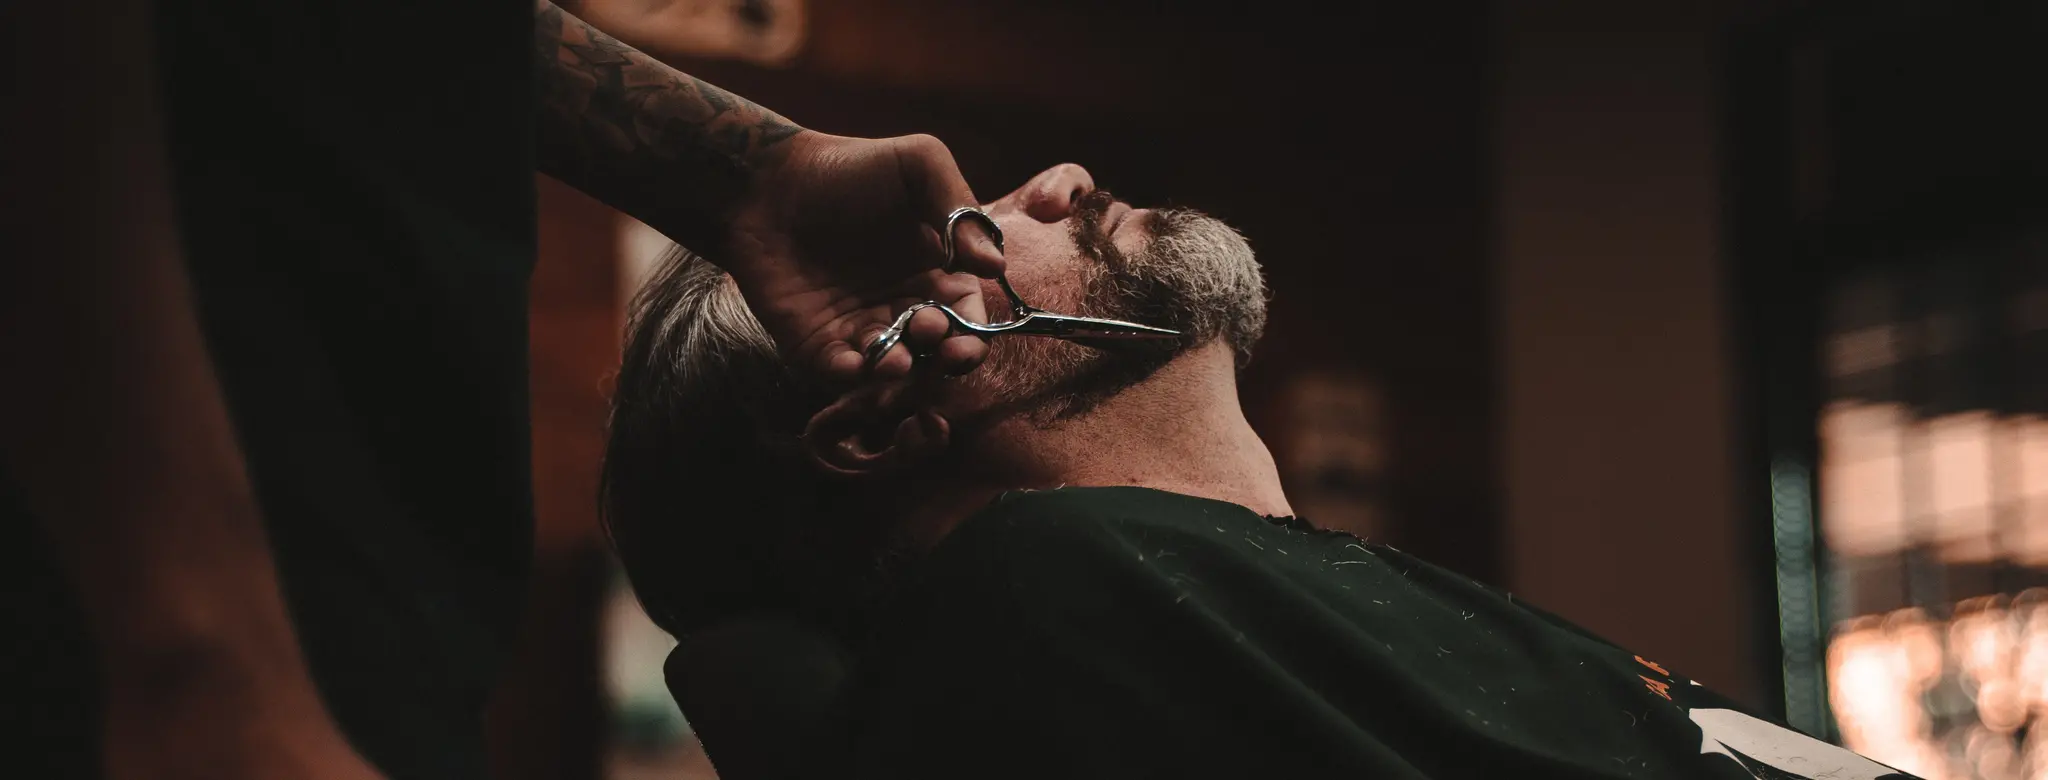 Man reclined in chair and getting beard his trimmed in barbershop